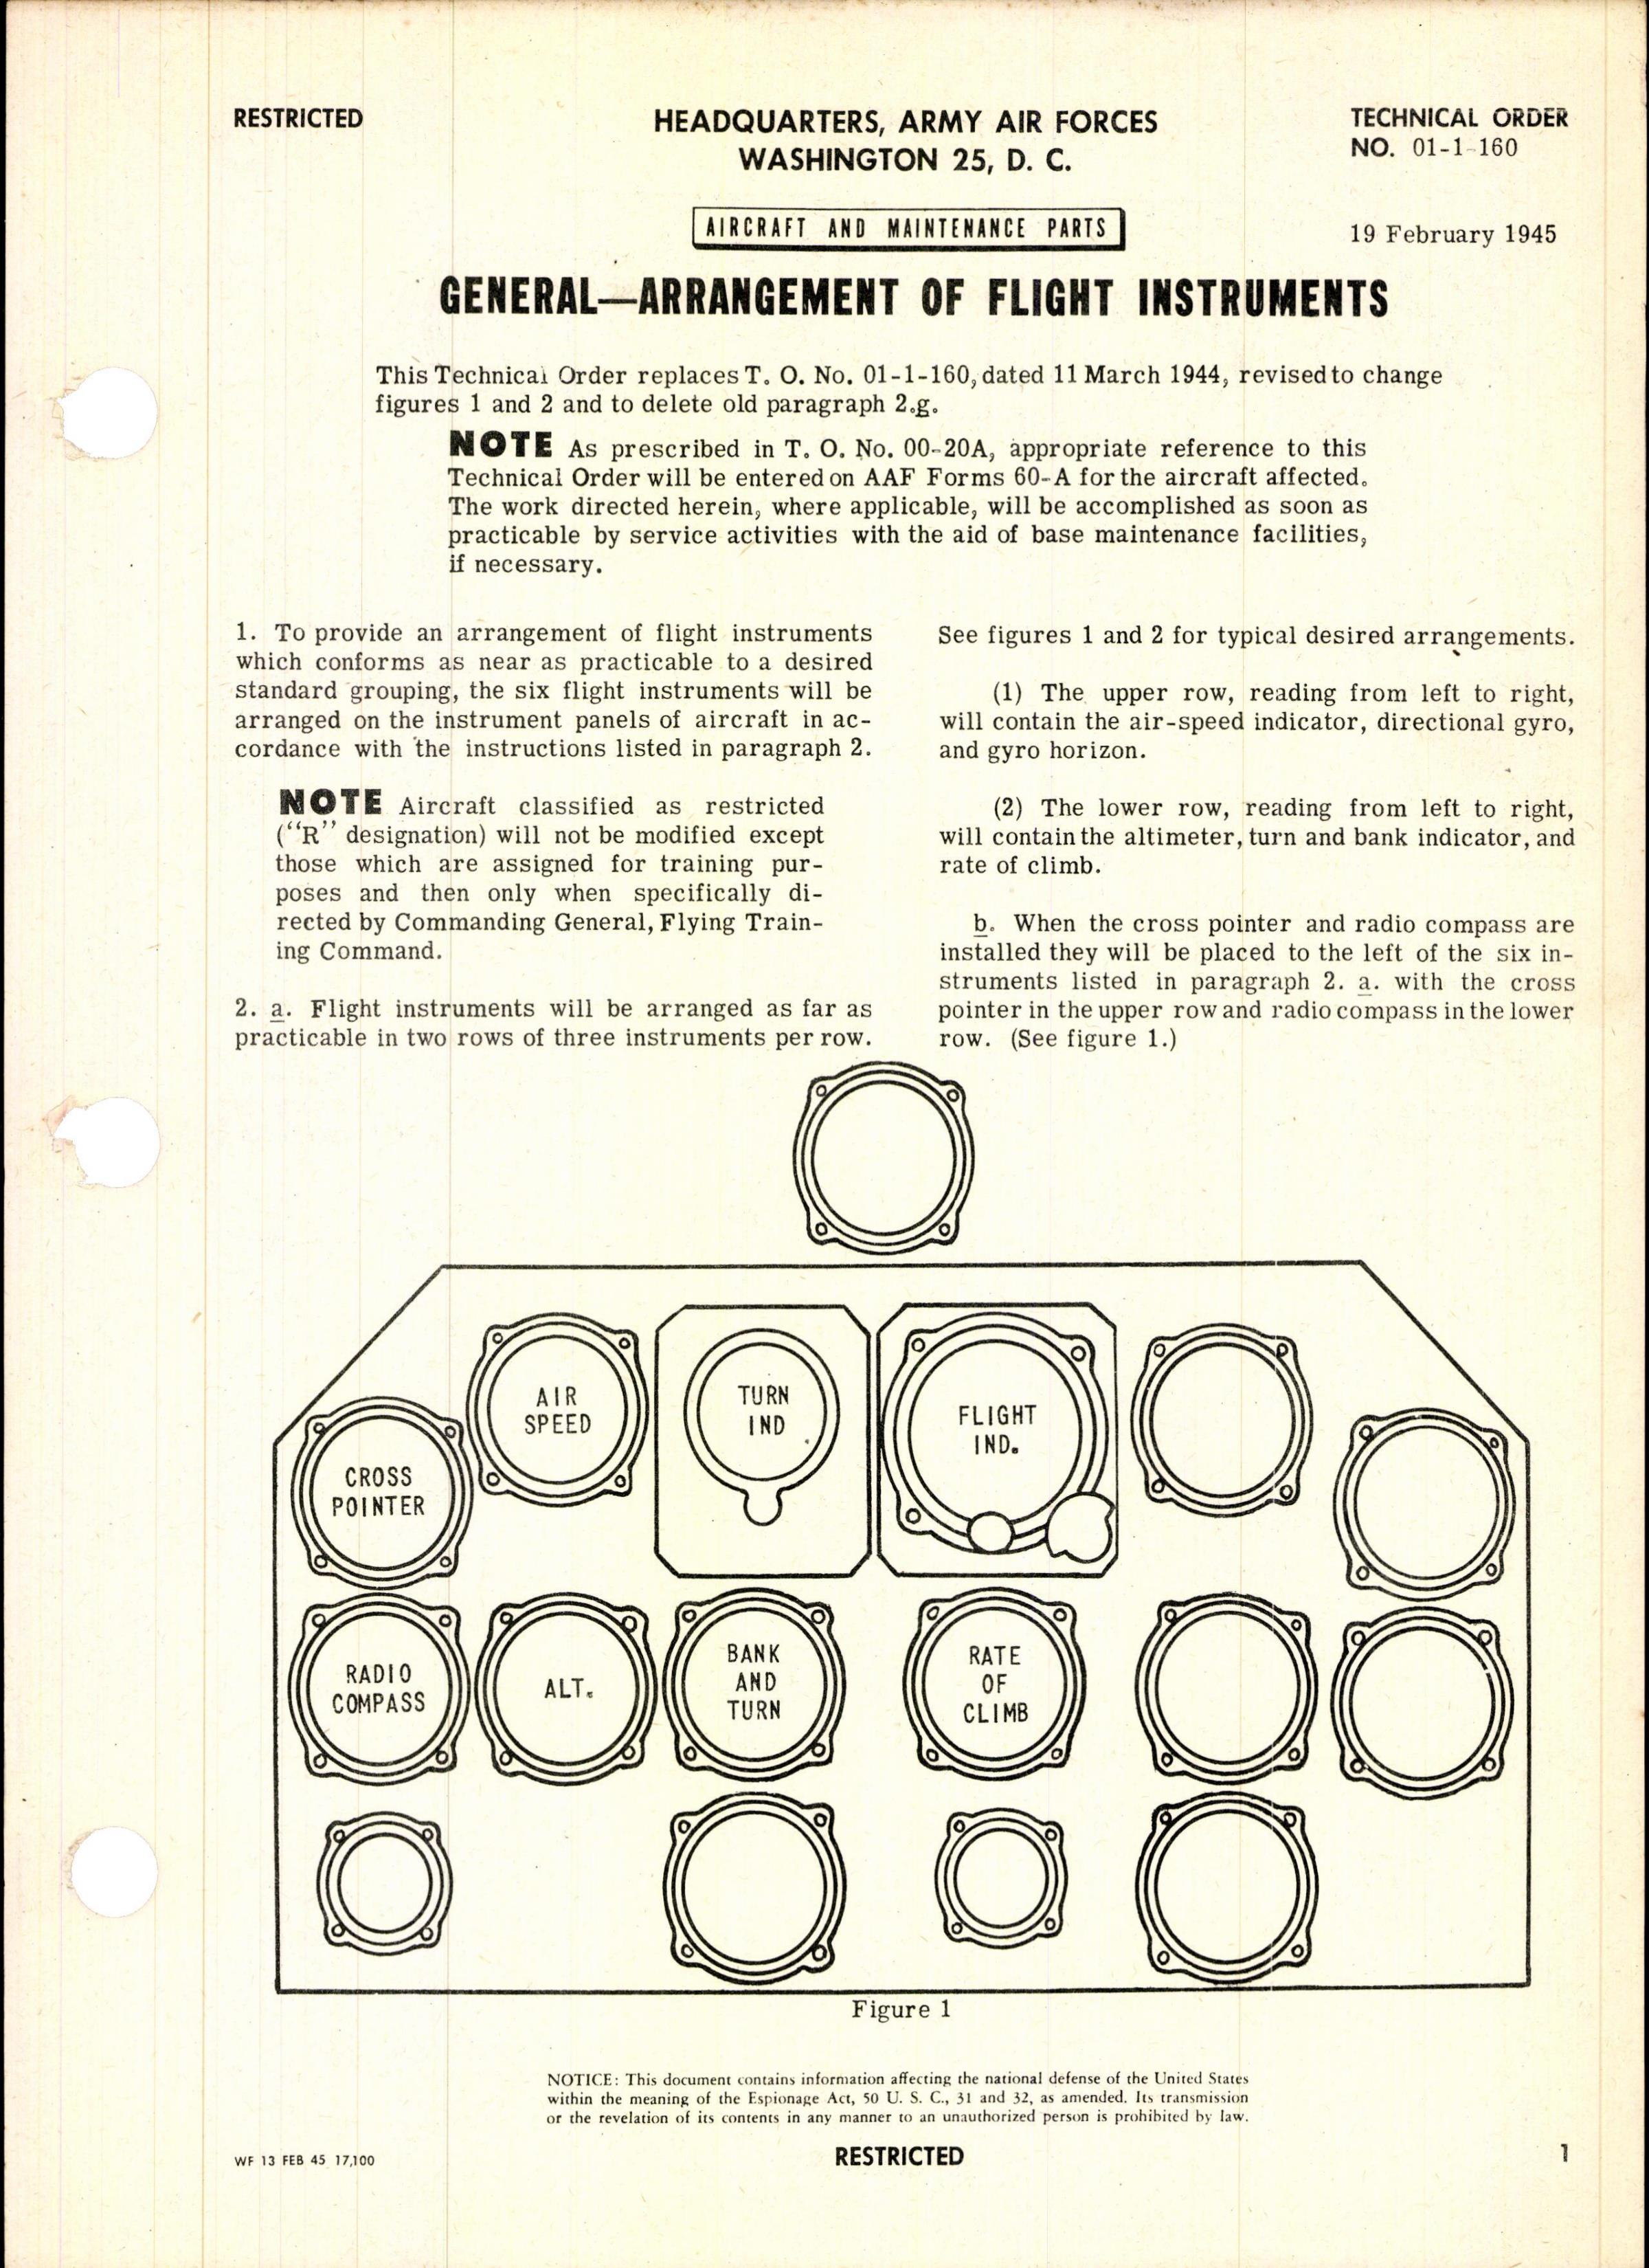 Sample page 1 from AirCorps Library document: Arrangement of Flight Instruments